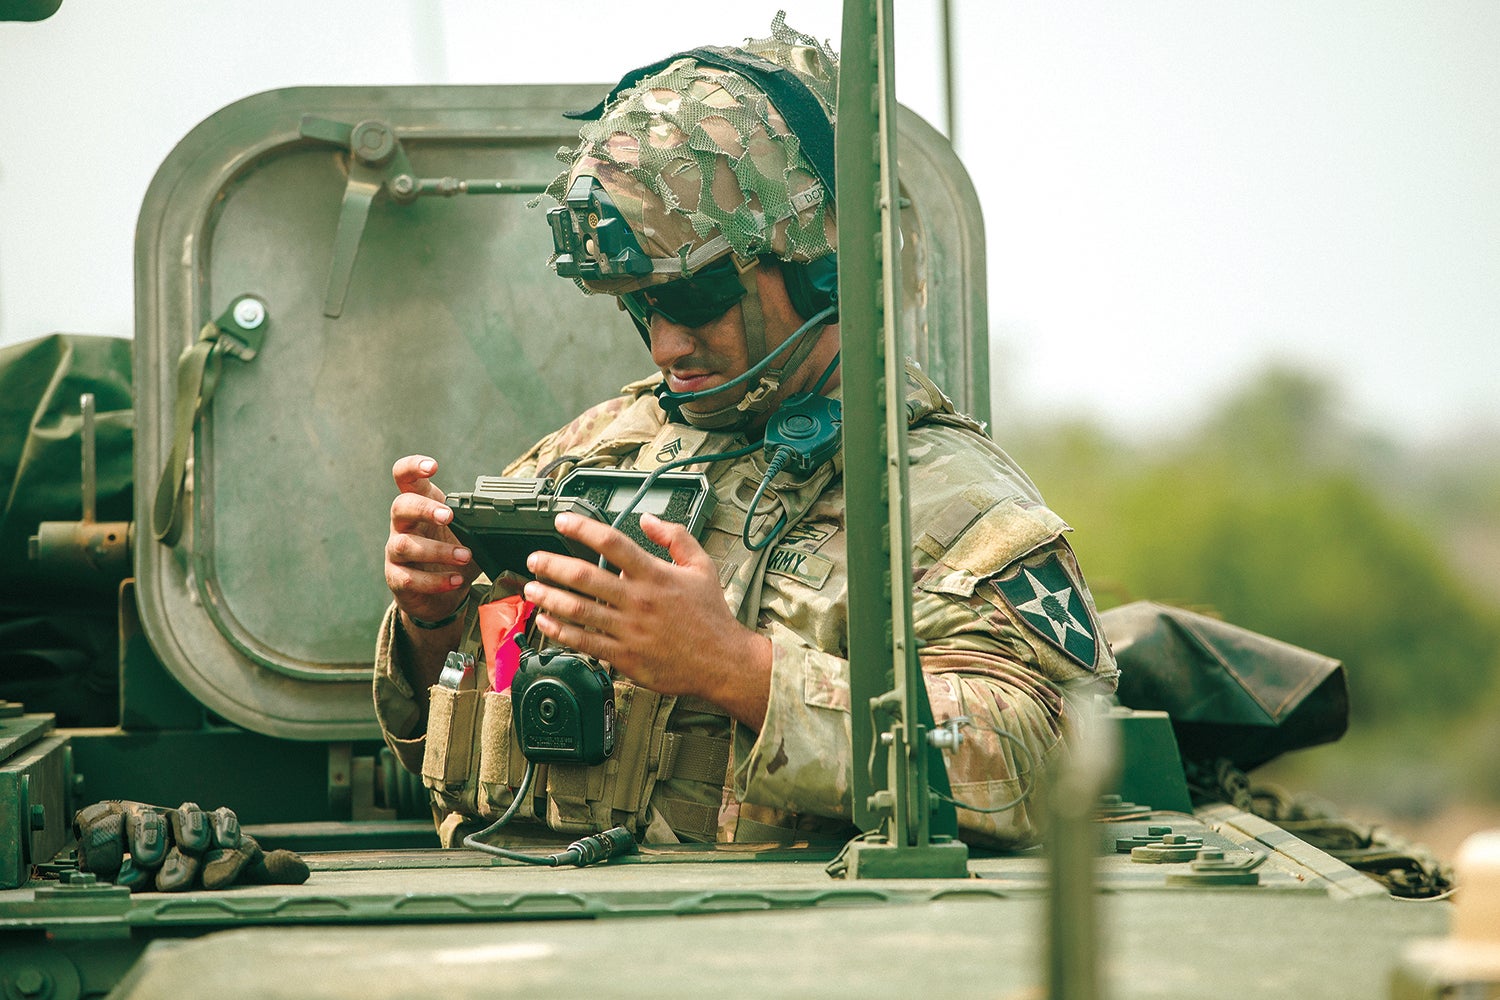 A soldier in a Stryker armored vehicle from the 2nd Battalion, 3rd Infantry Regiment, prepares for a live-fire exercise rehearsal during an exercise in Thailand. (Credit: U.S. Army/Spc. Christopher Wilkins)